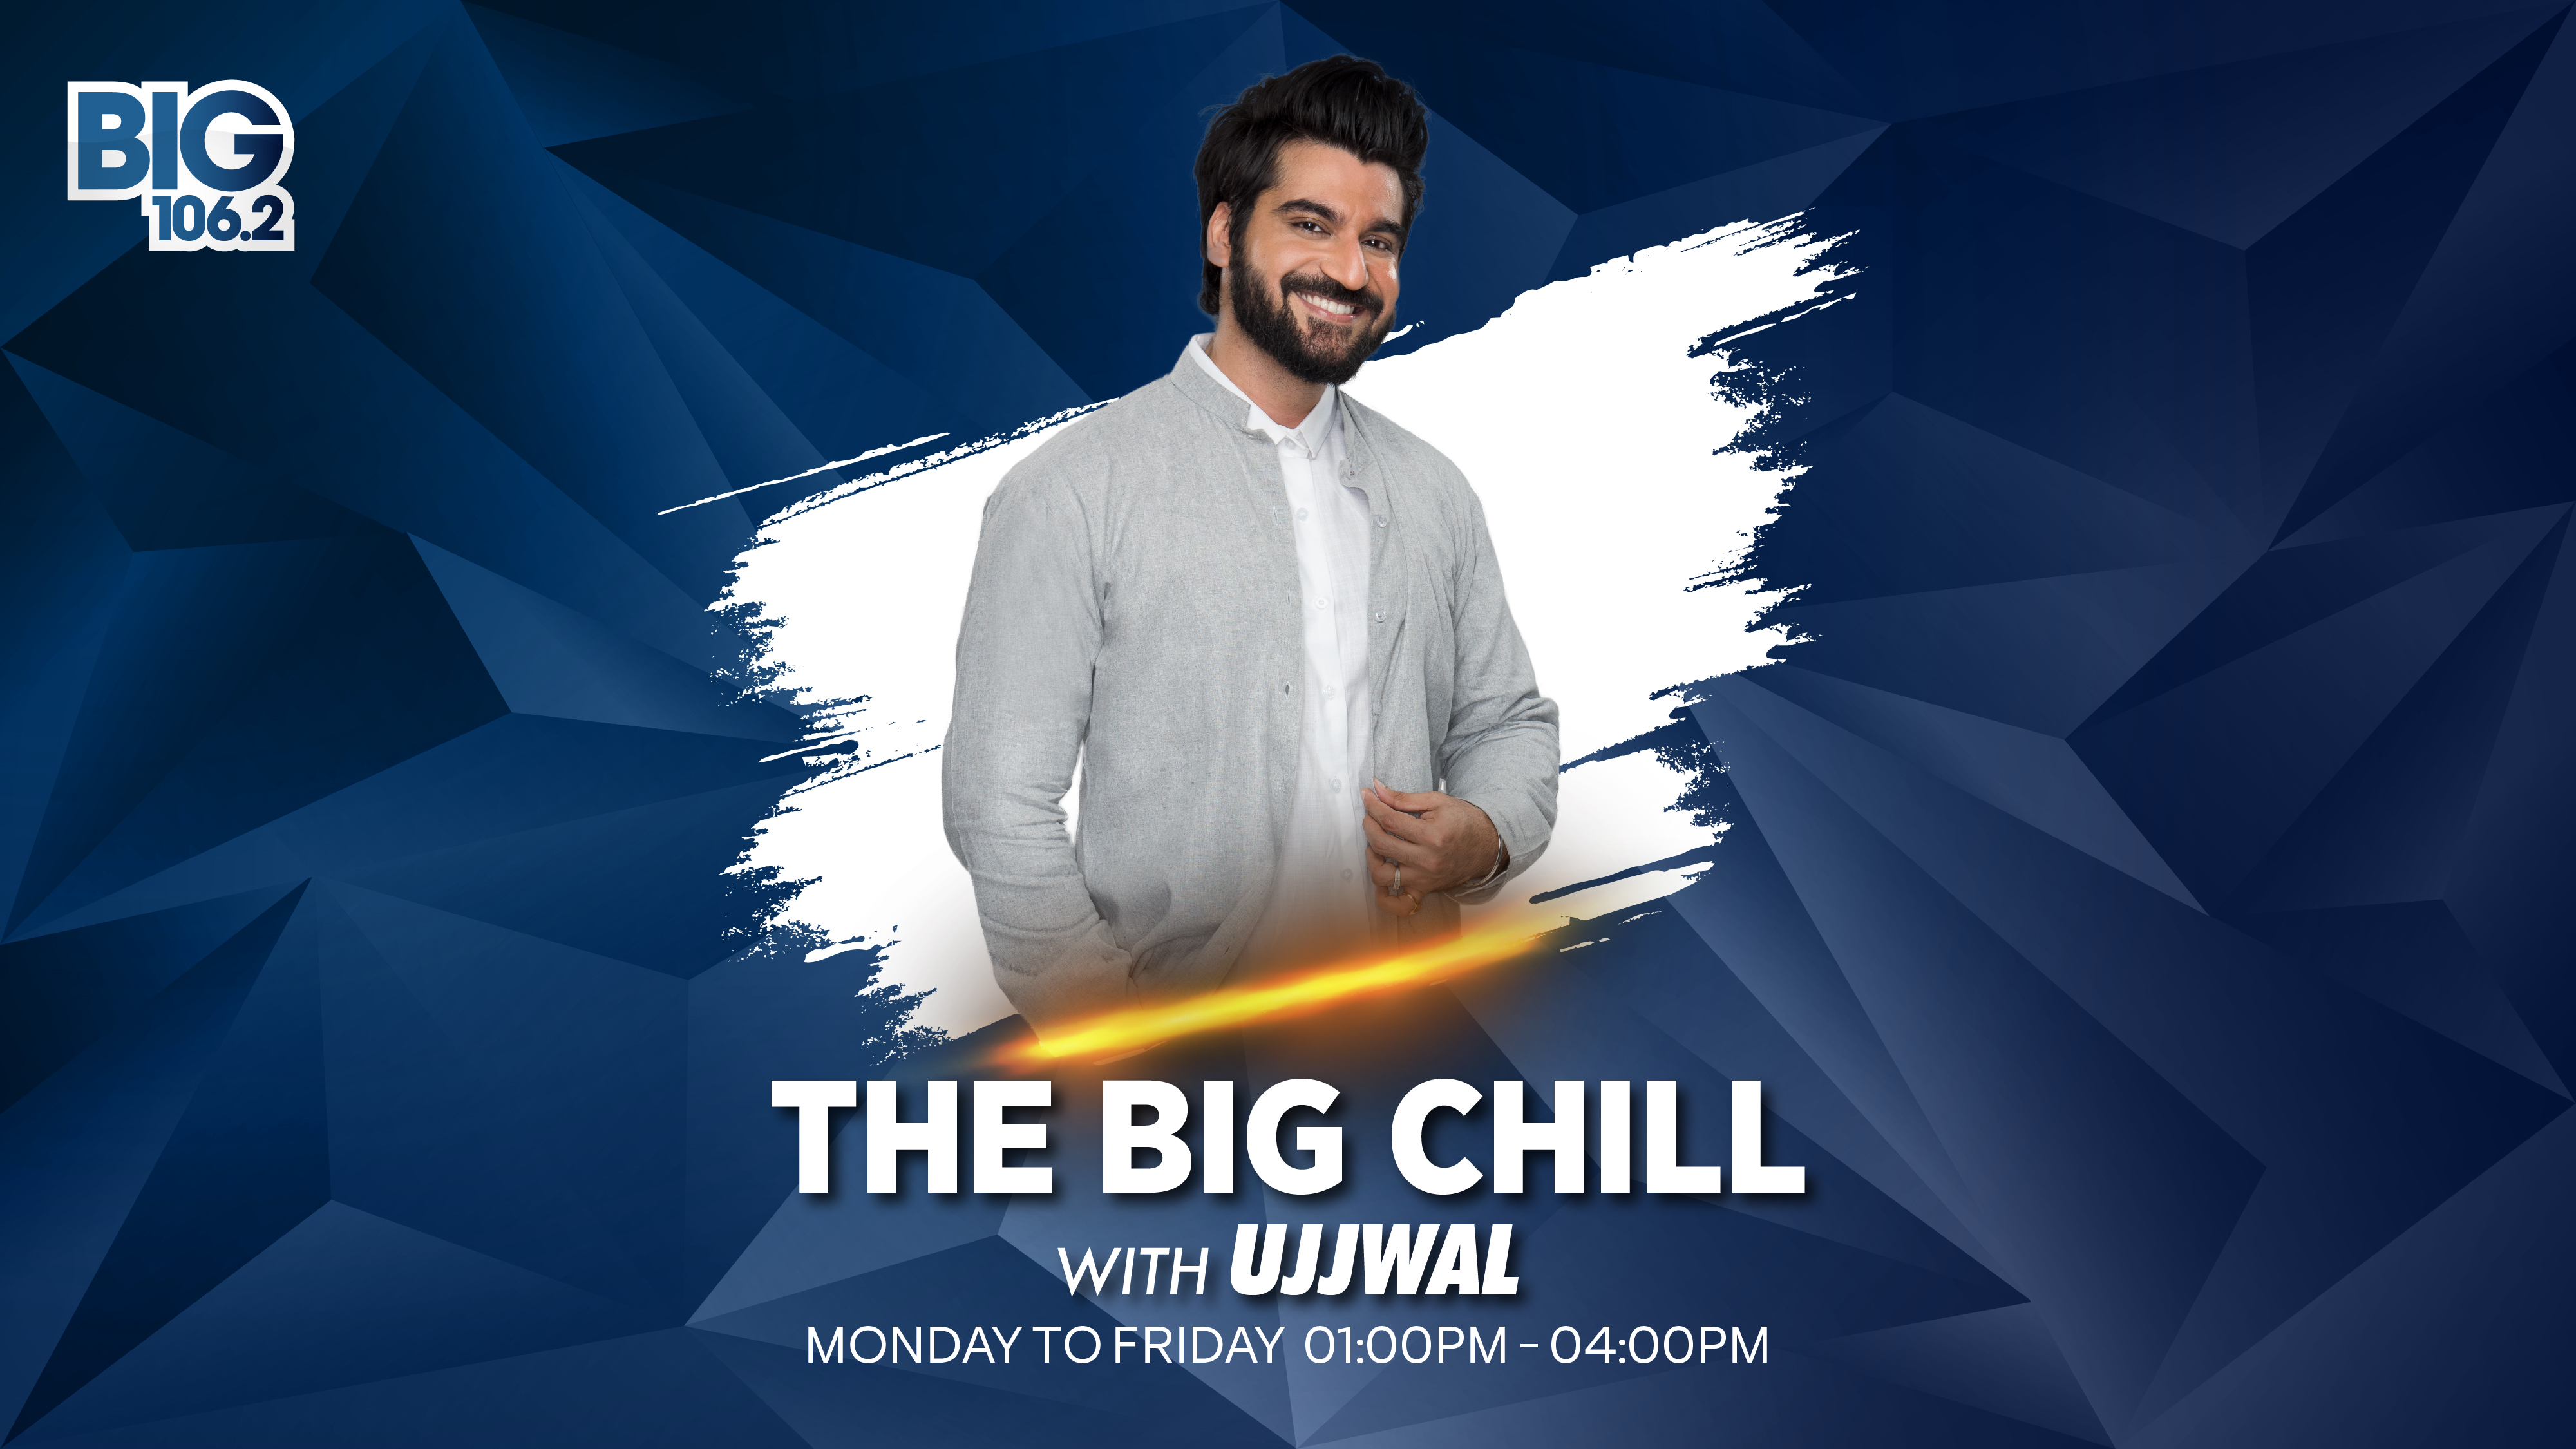 The Big Chill Show - MONDAY